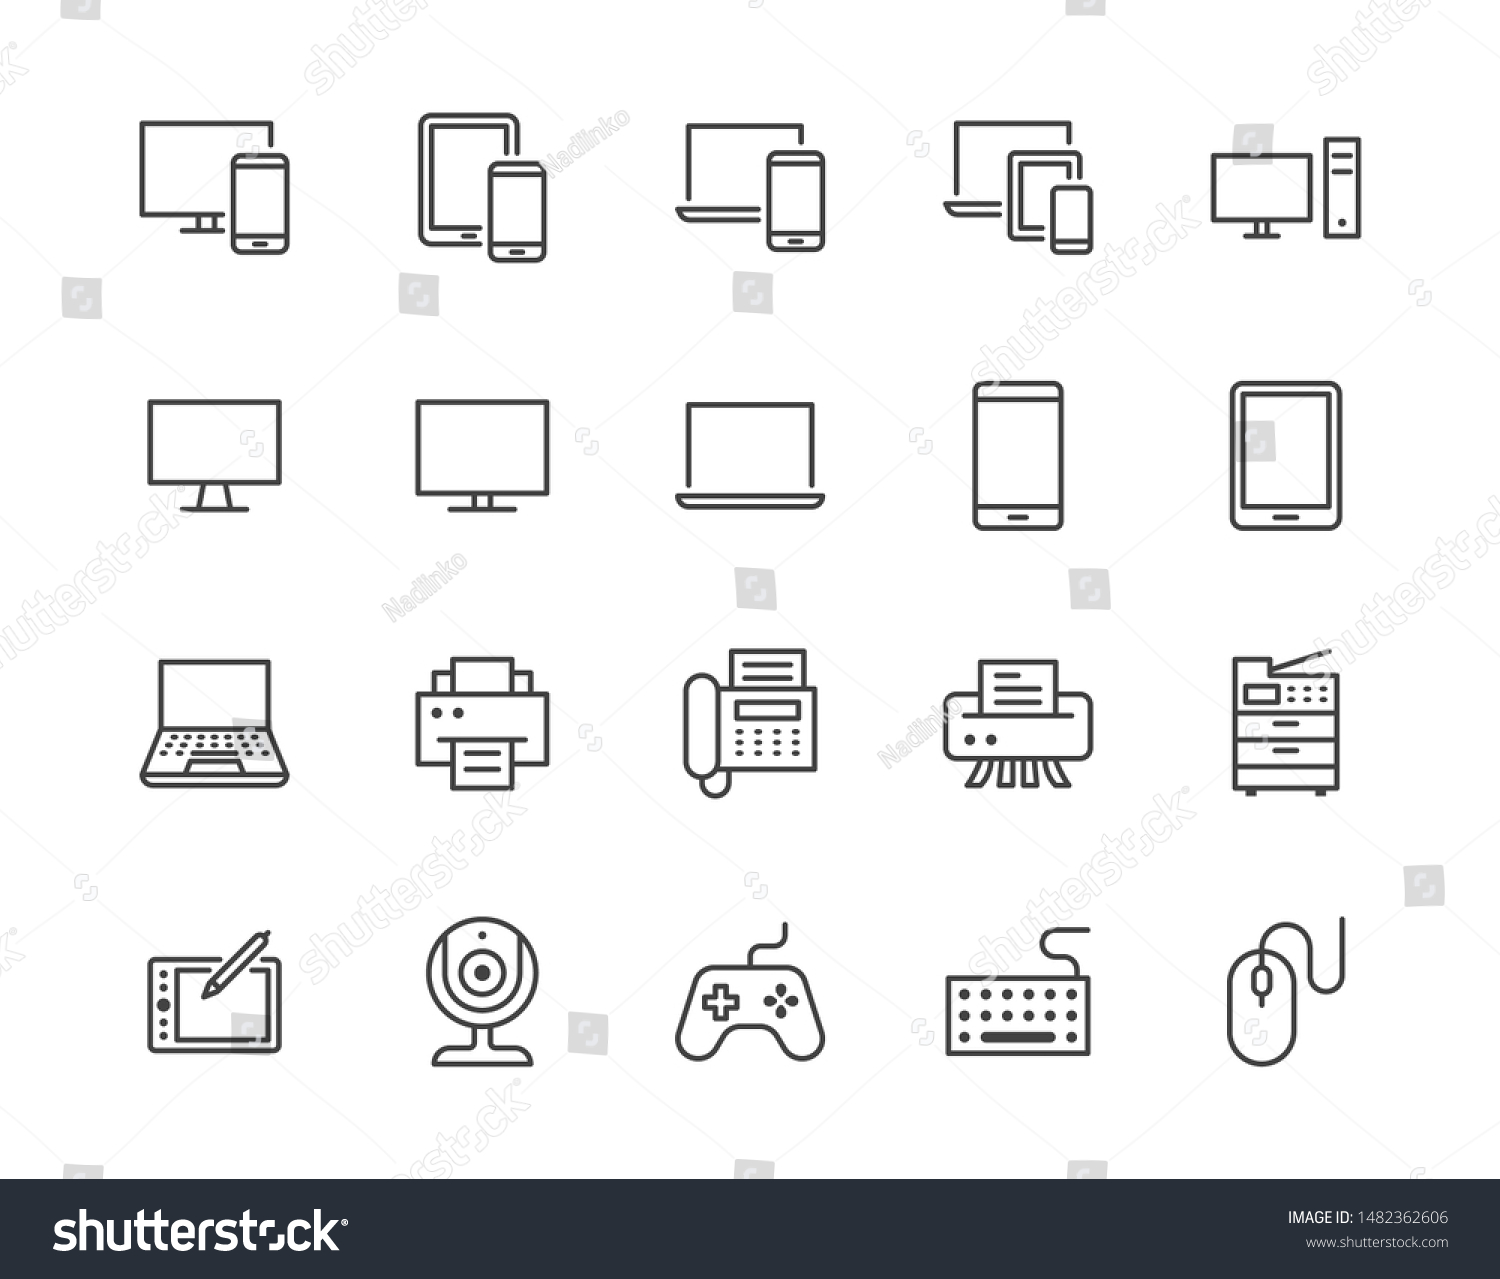 Devices flat line icons set. Pc, laptop, computer, smartphone, desktop, office copy machine vector illustrations. Outline minimal signs for electronic store. Pixel perfect. Editable Strokes. #1482362606